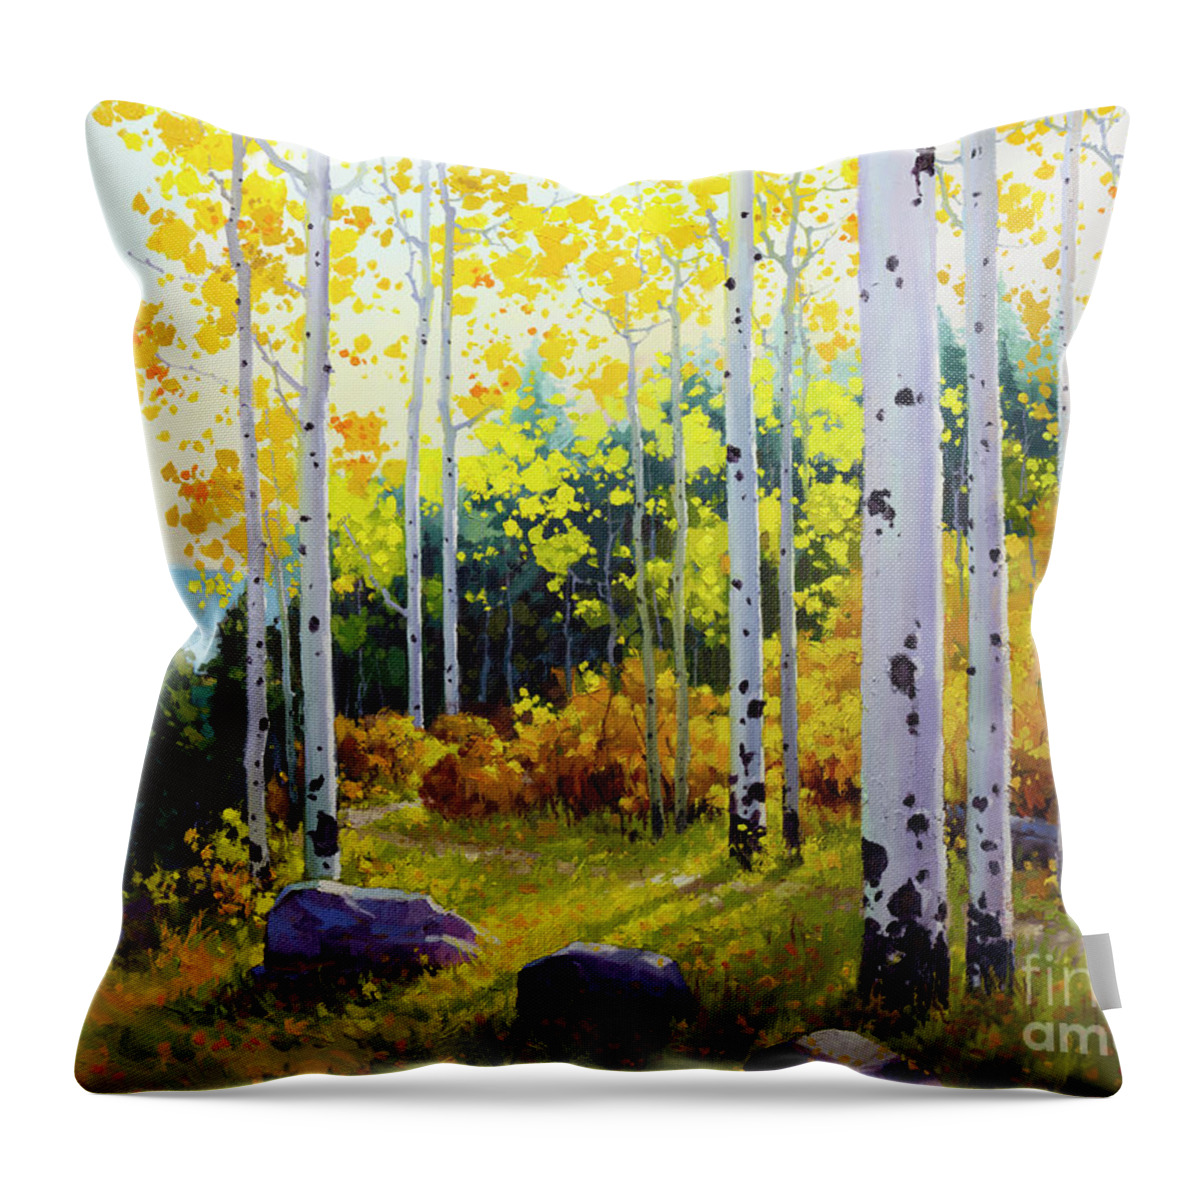 Aspen Throw Pillow featuring the painting Late Afternoon Aspen Vista by Gary Kim